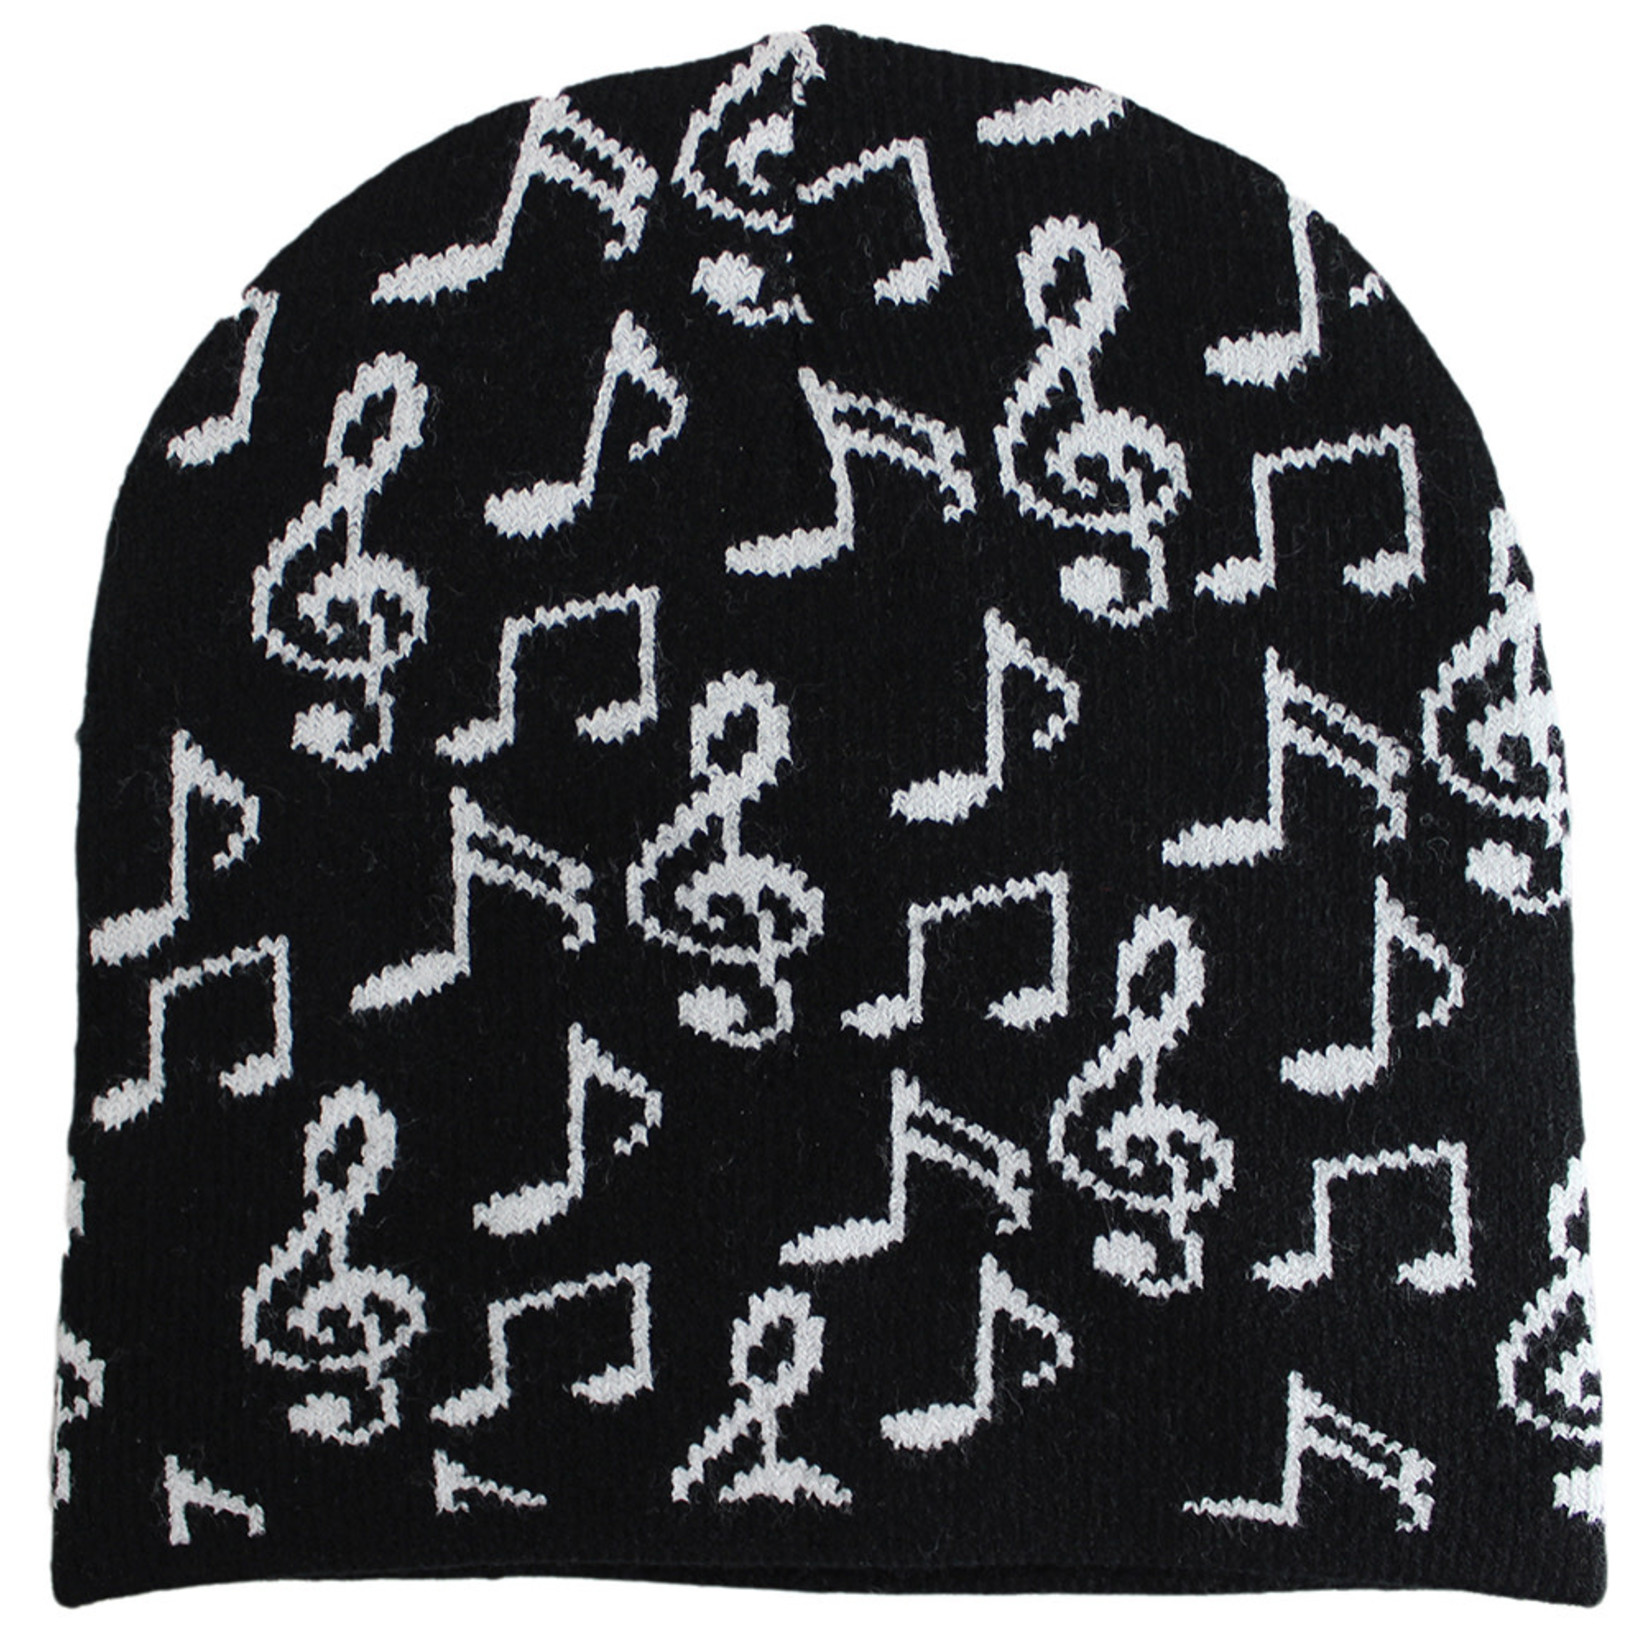 Beanie black with white music notes FINAL SALE CLEARACE